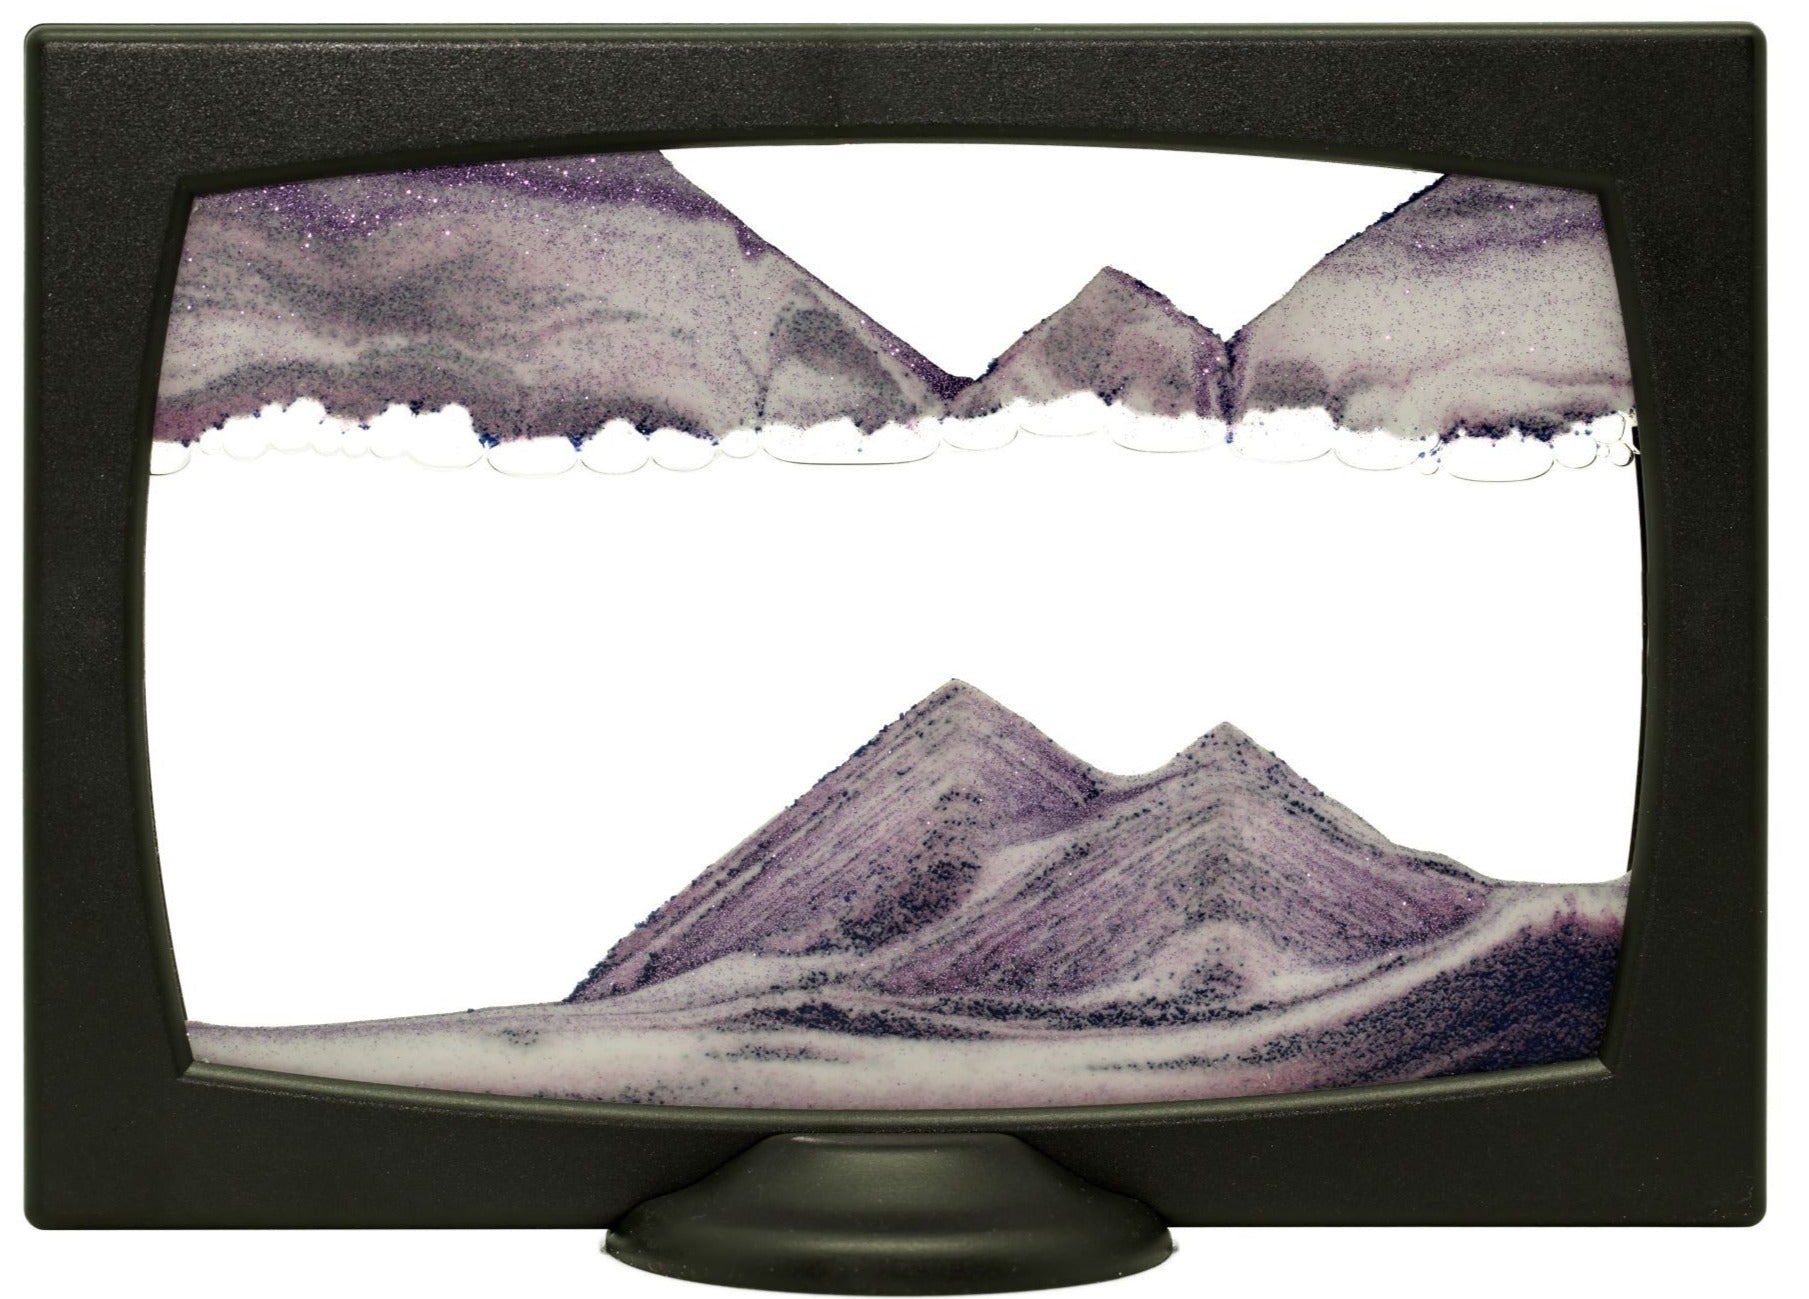 Picture of KB Collection Screenie Purple Char Sand Art - By Klaus Bosch sold by MovingSandArt.com